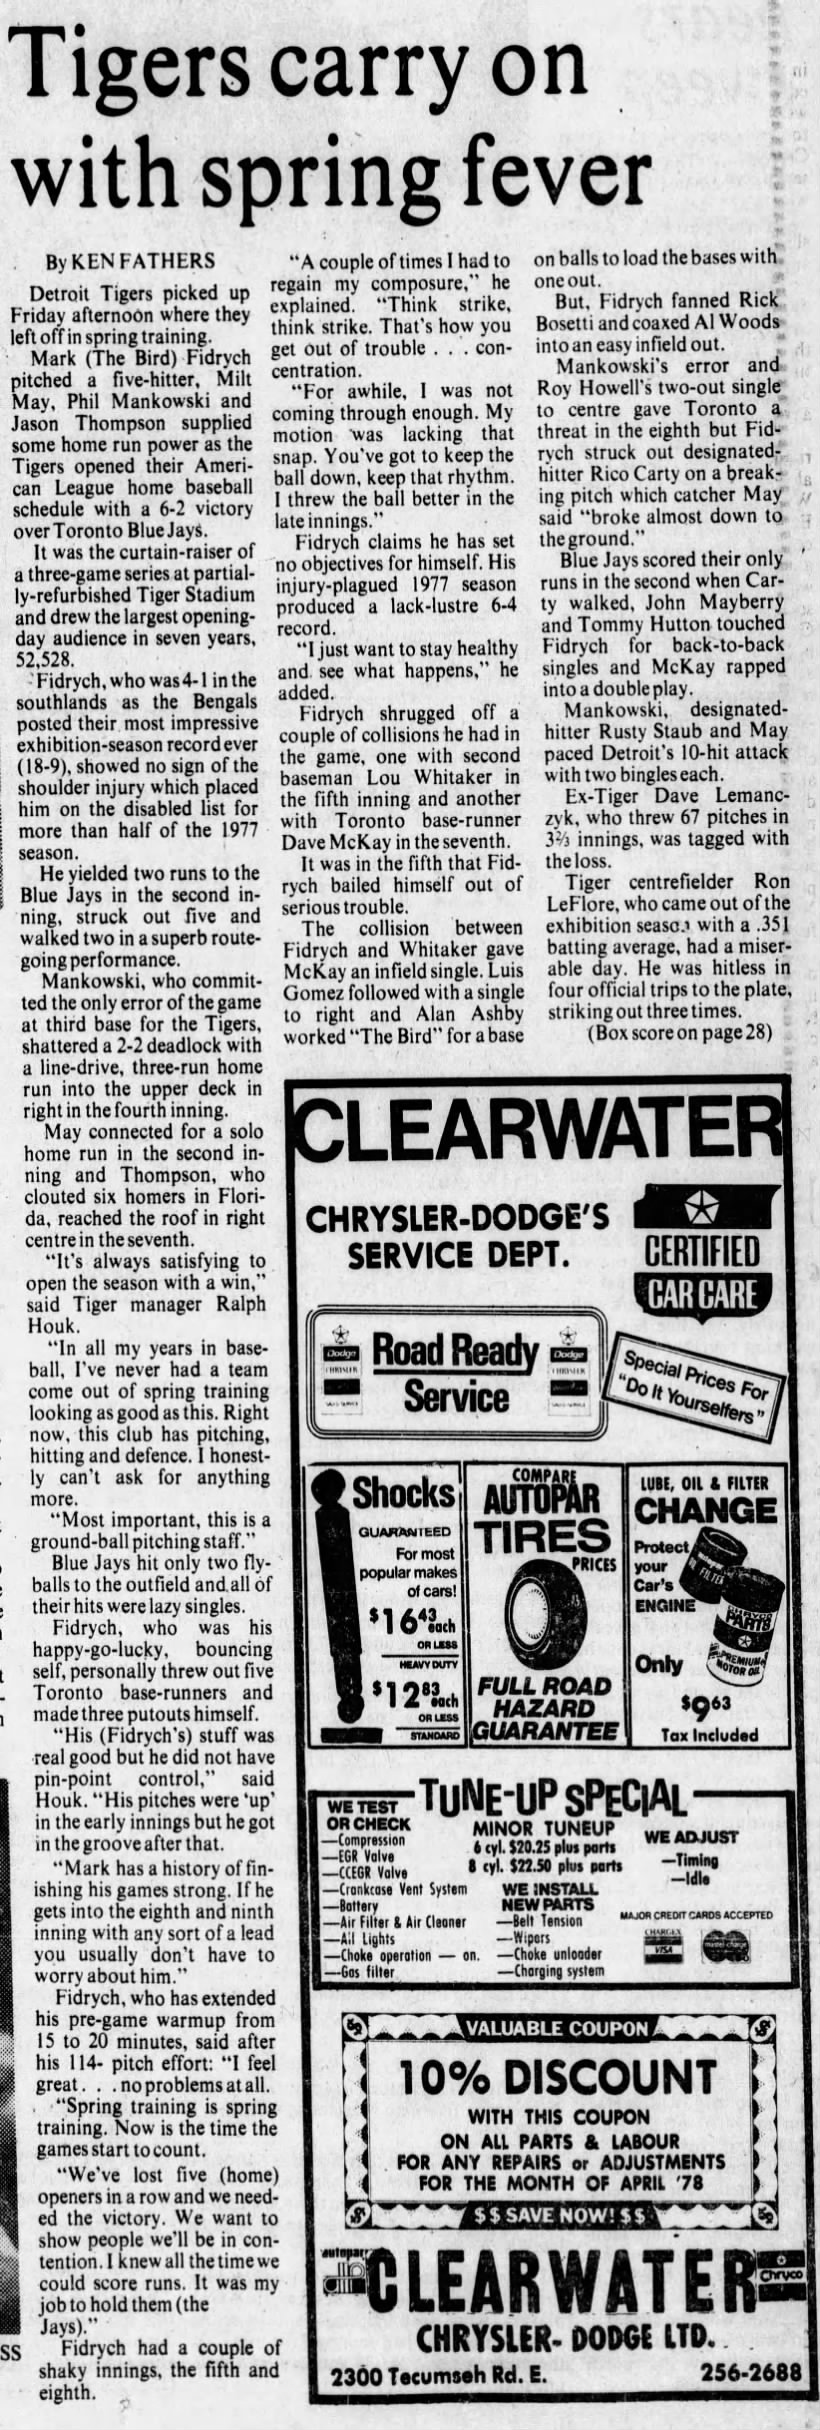 Sat 4/8/78: '78 Opening Day (Windsor coverage)